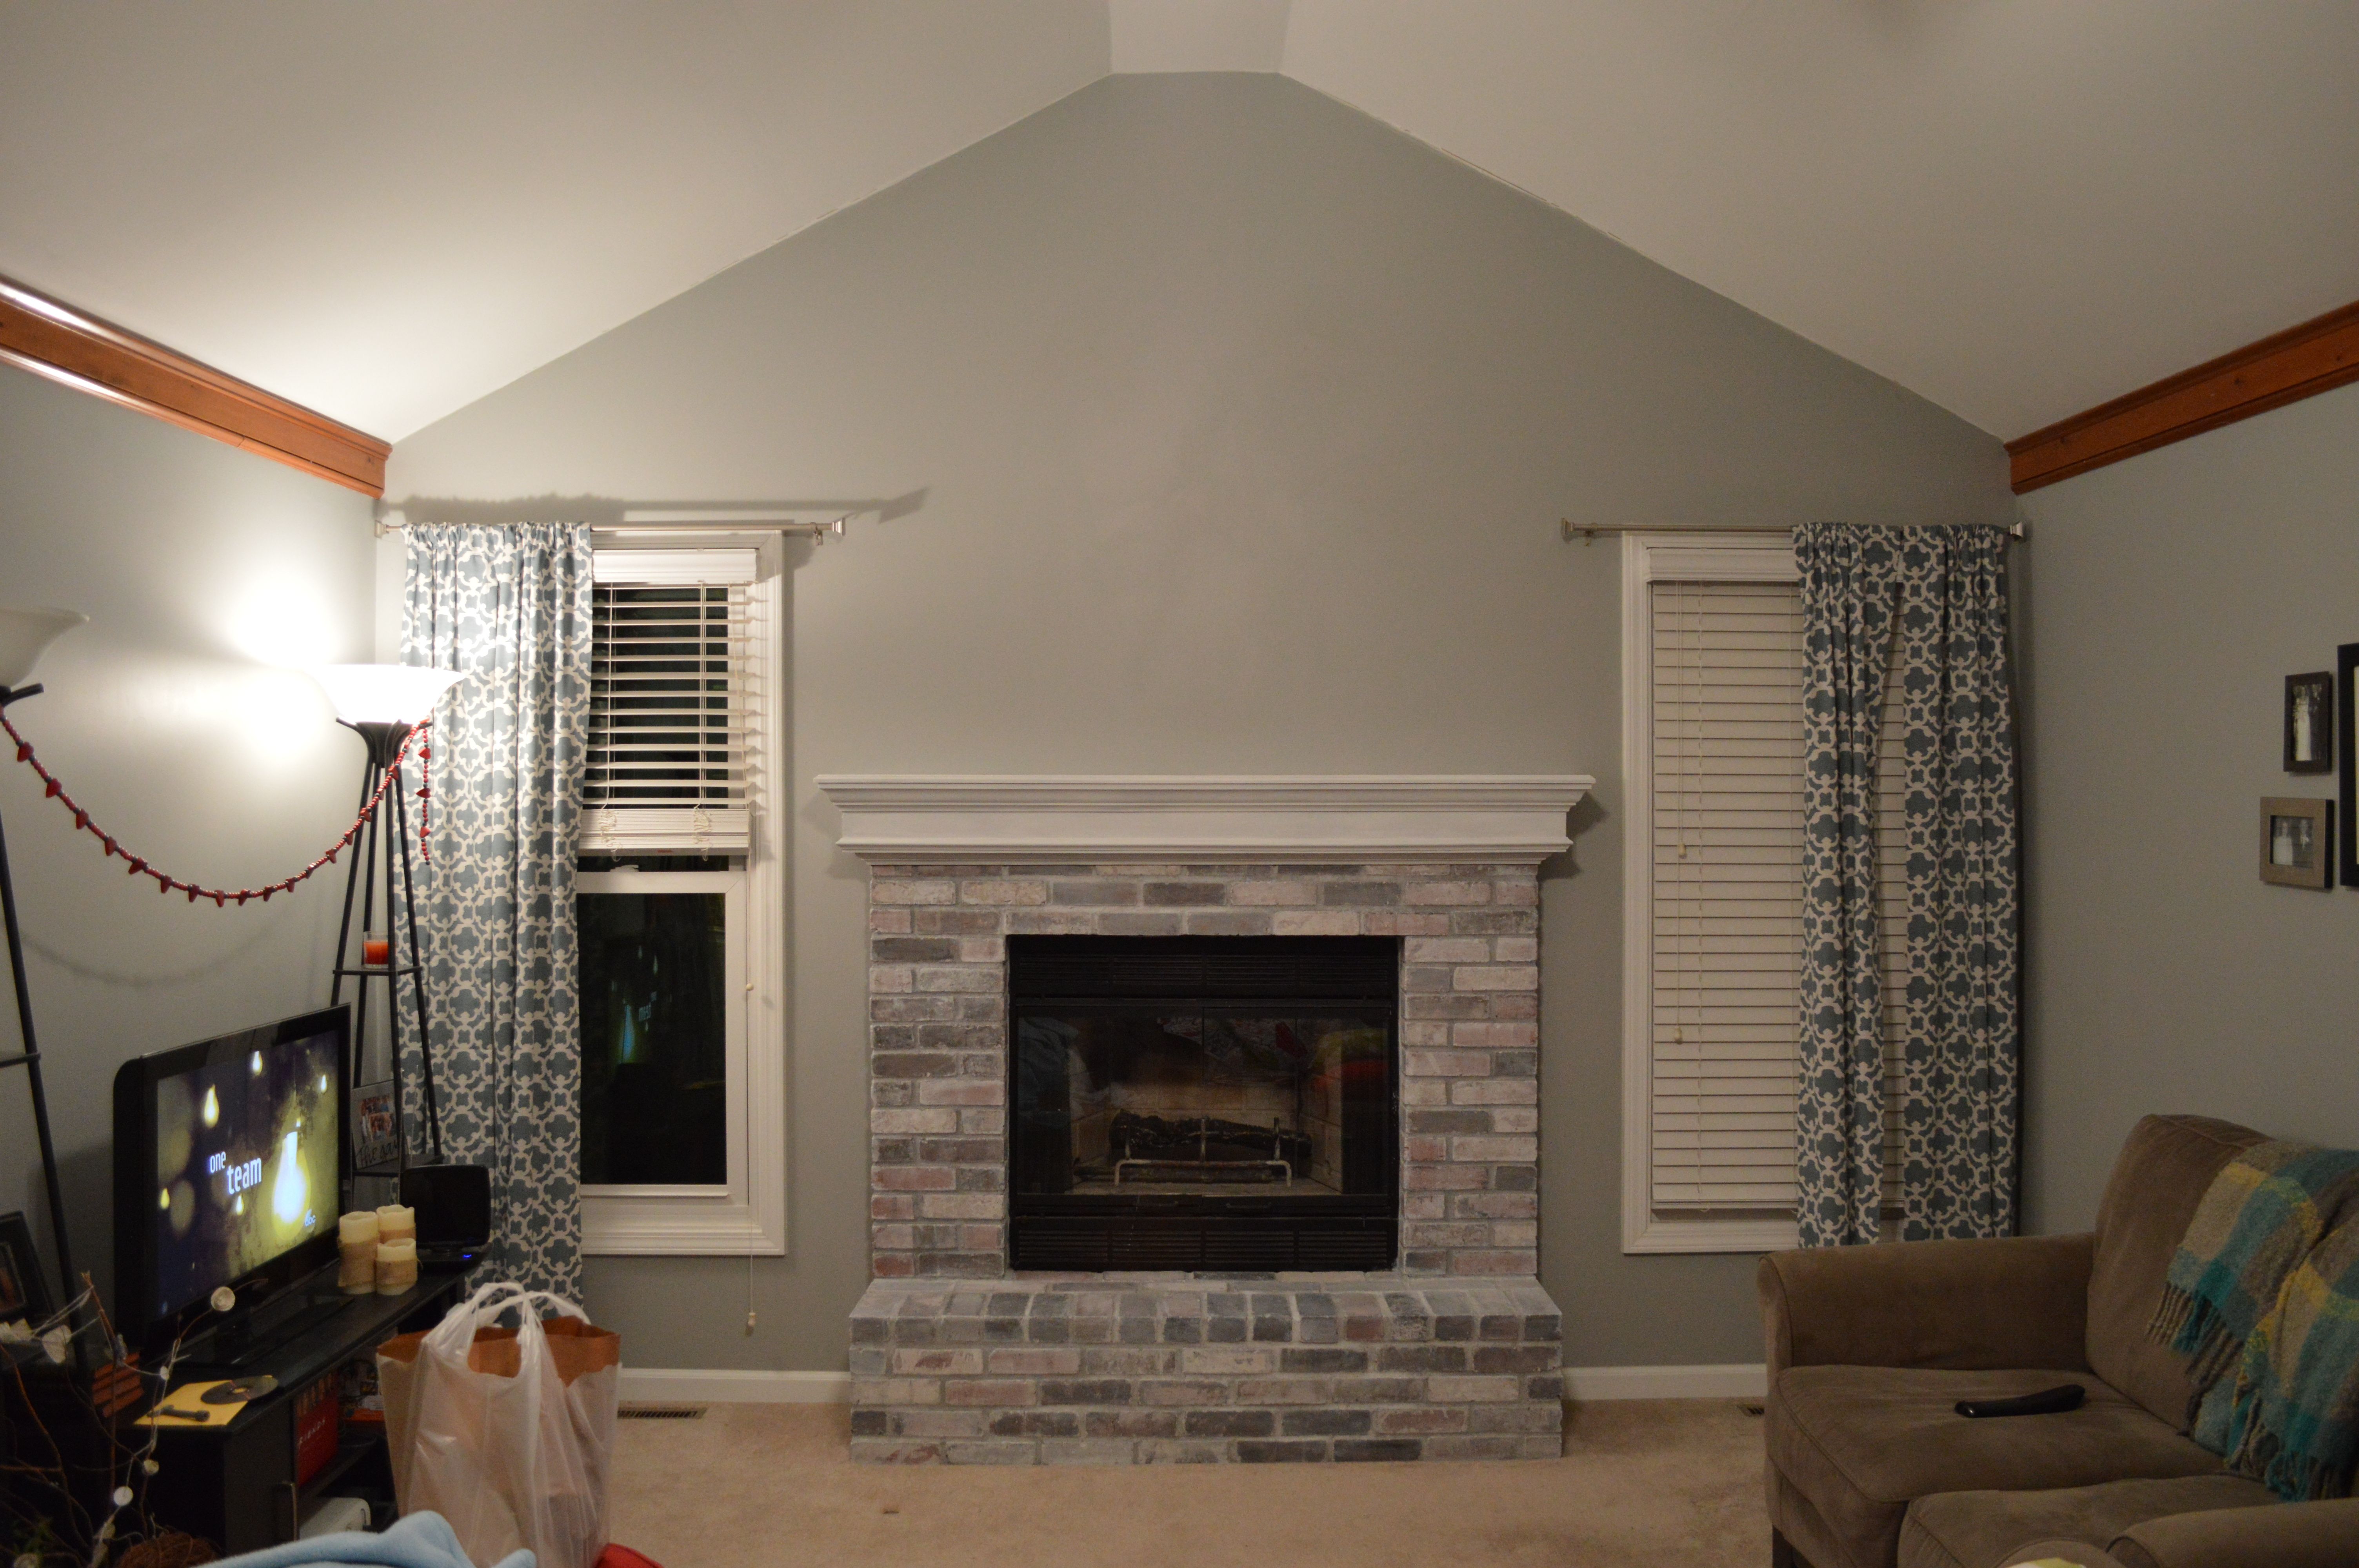 Painting Interior Brick Fireplace Inspirational How to Whitewash Brick Our Fireplace Makeover Loving